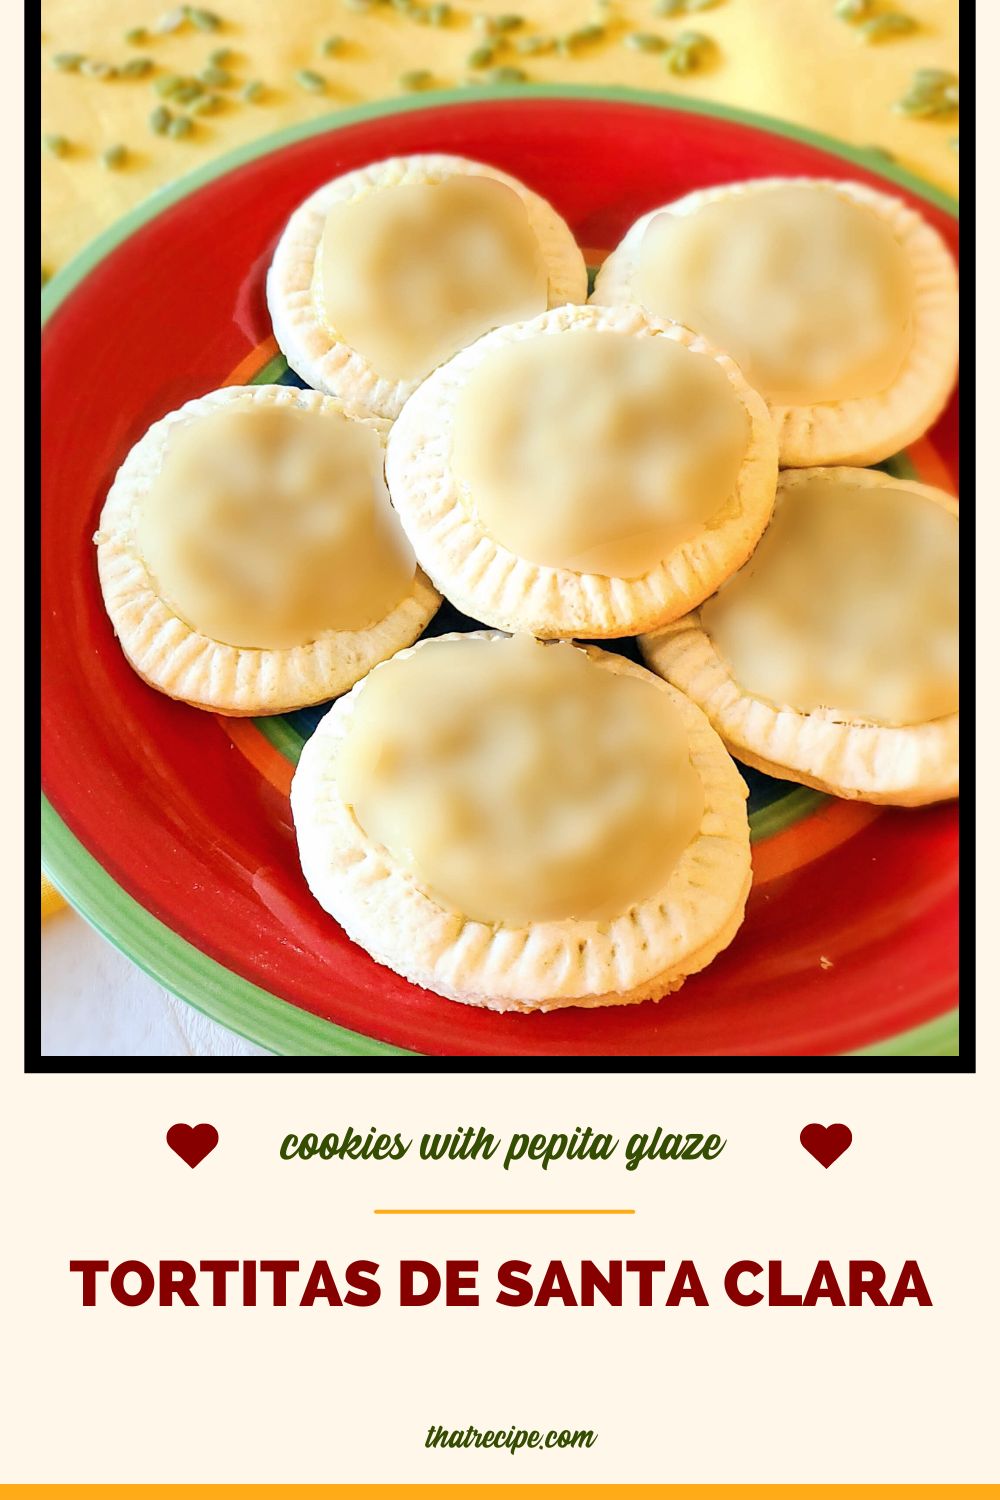 Cookies with a light green glaze on a plate with text overlay Tortitas de Santa Clara